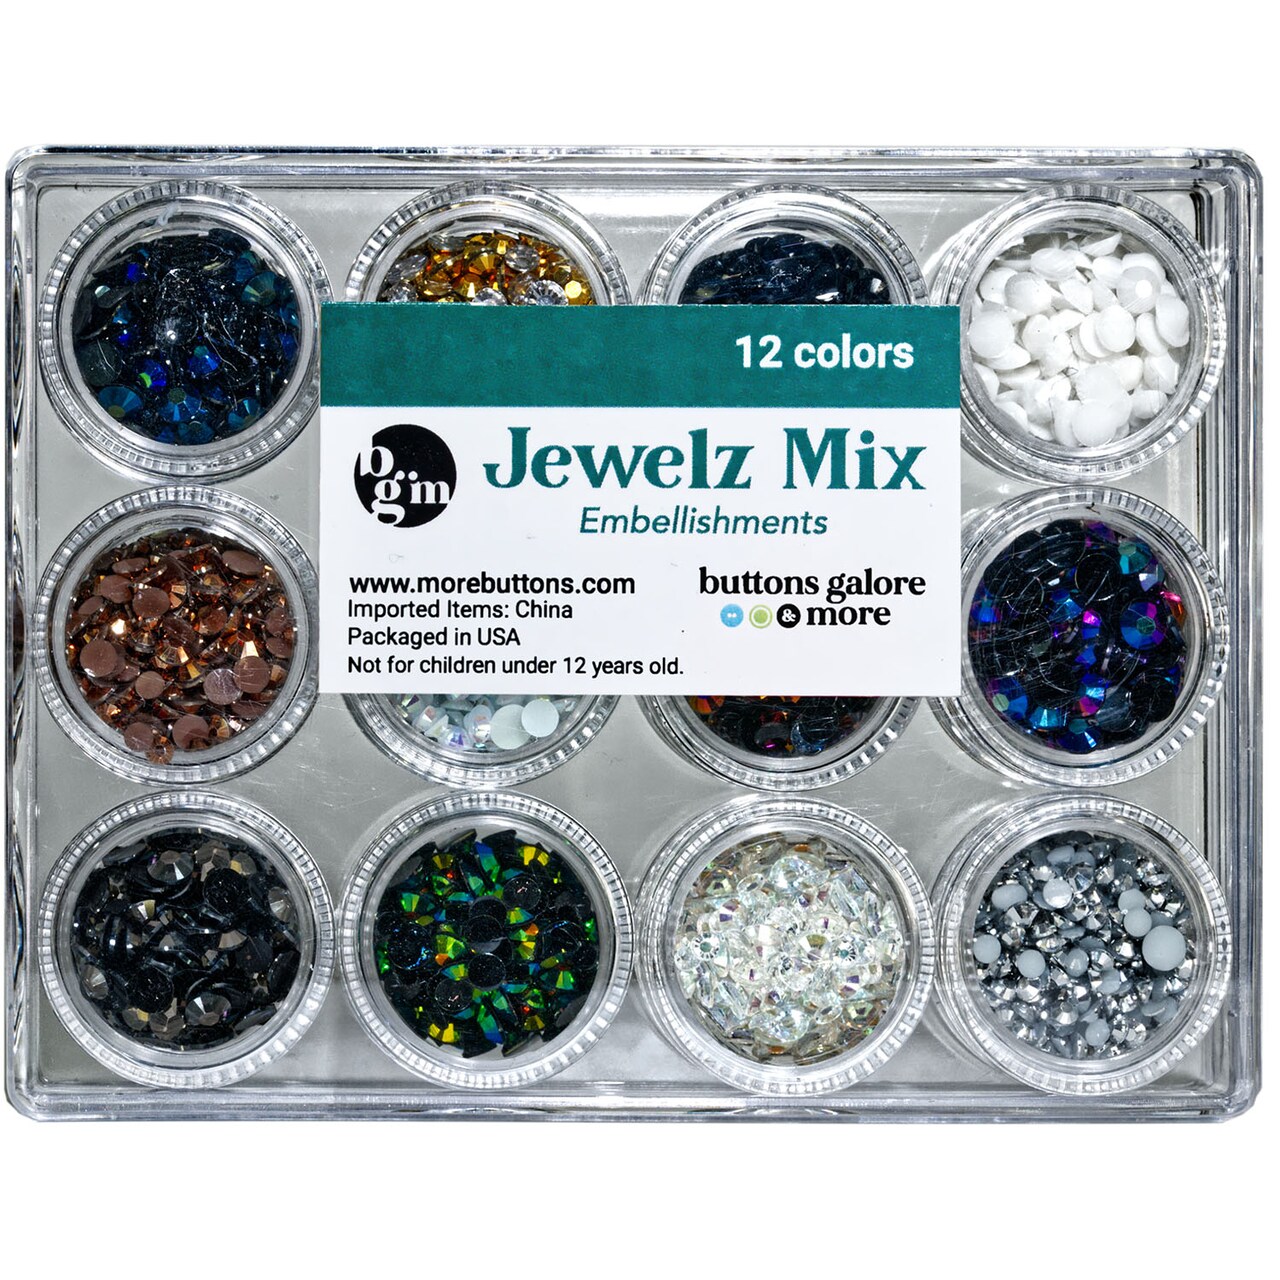 Buttons Galore and More Neutral Jewels for Crafts - 12 Colors